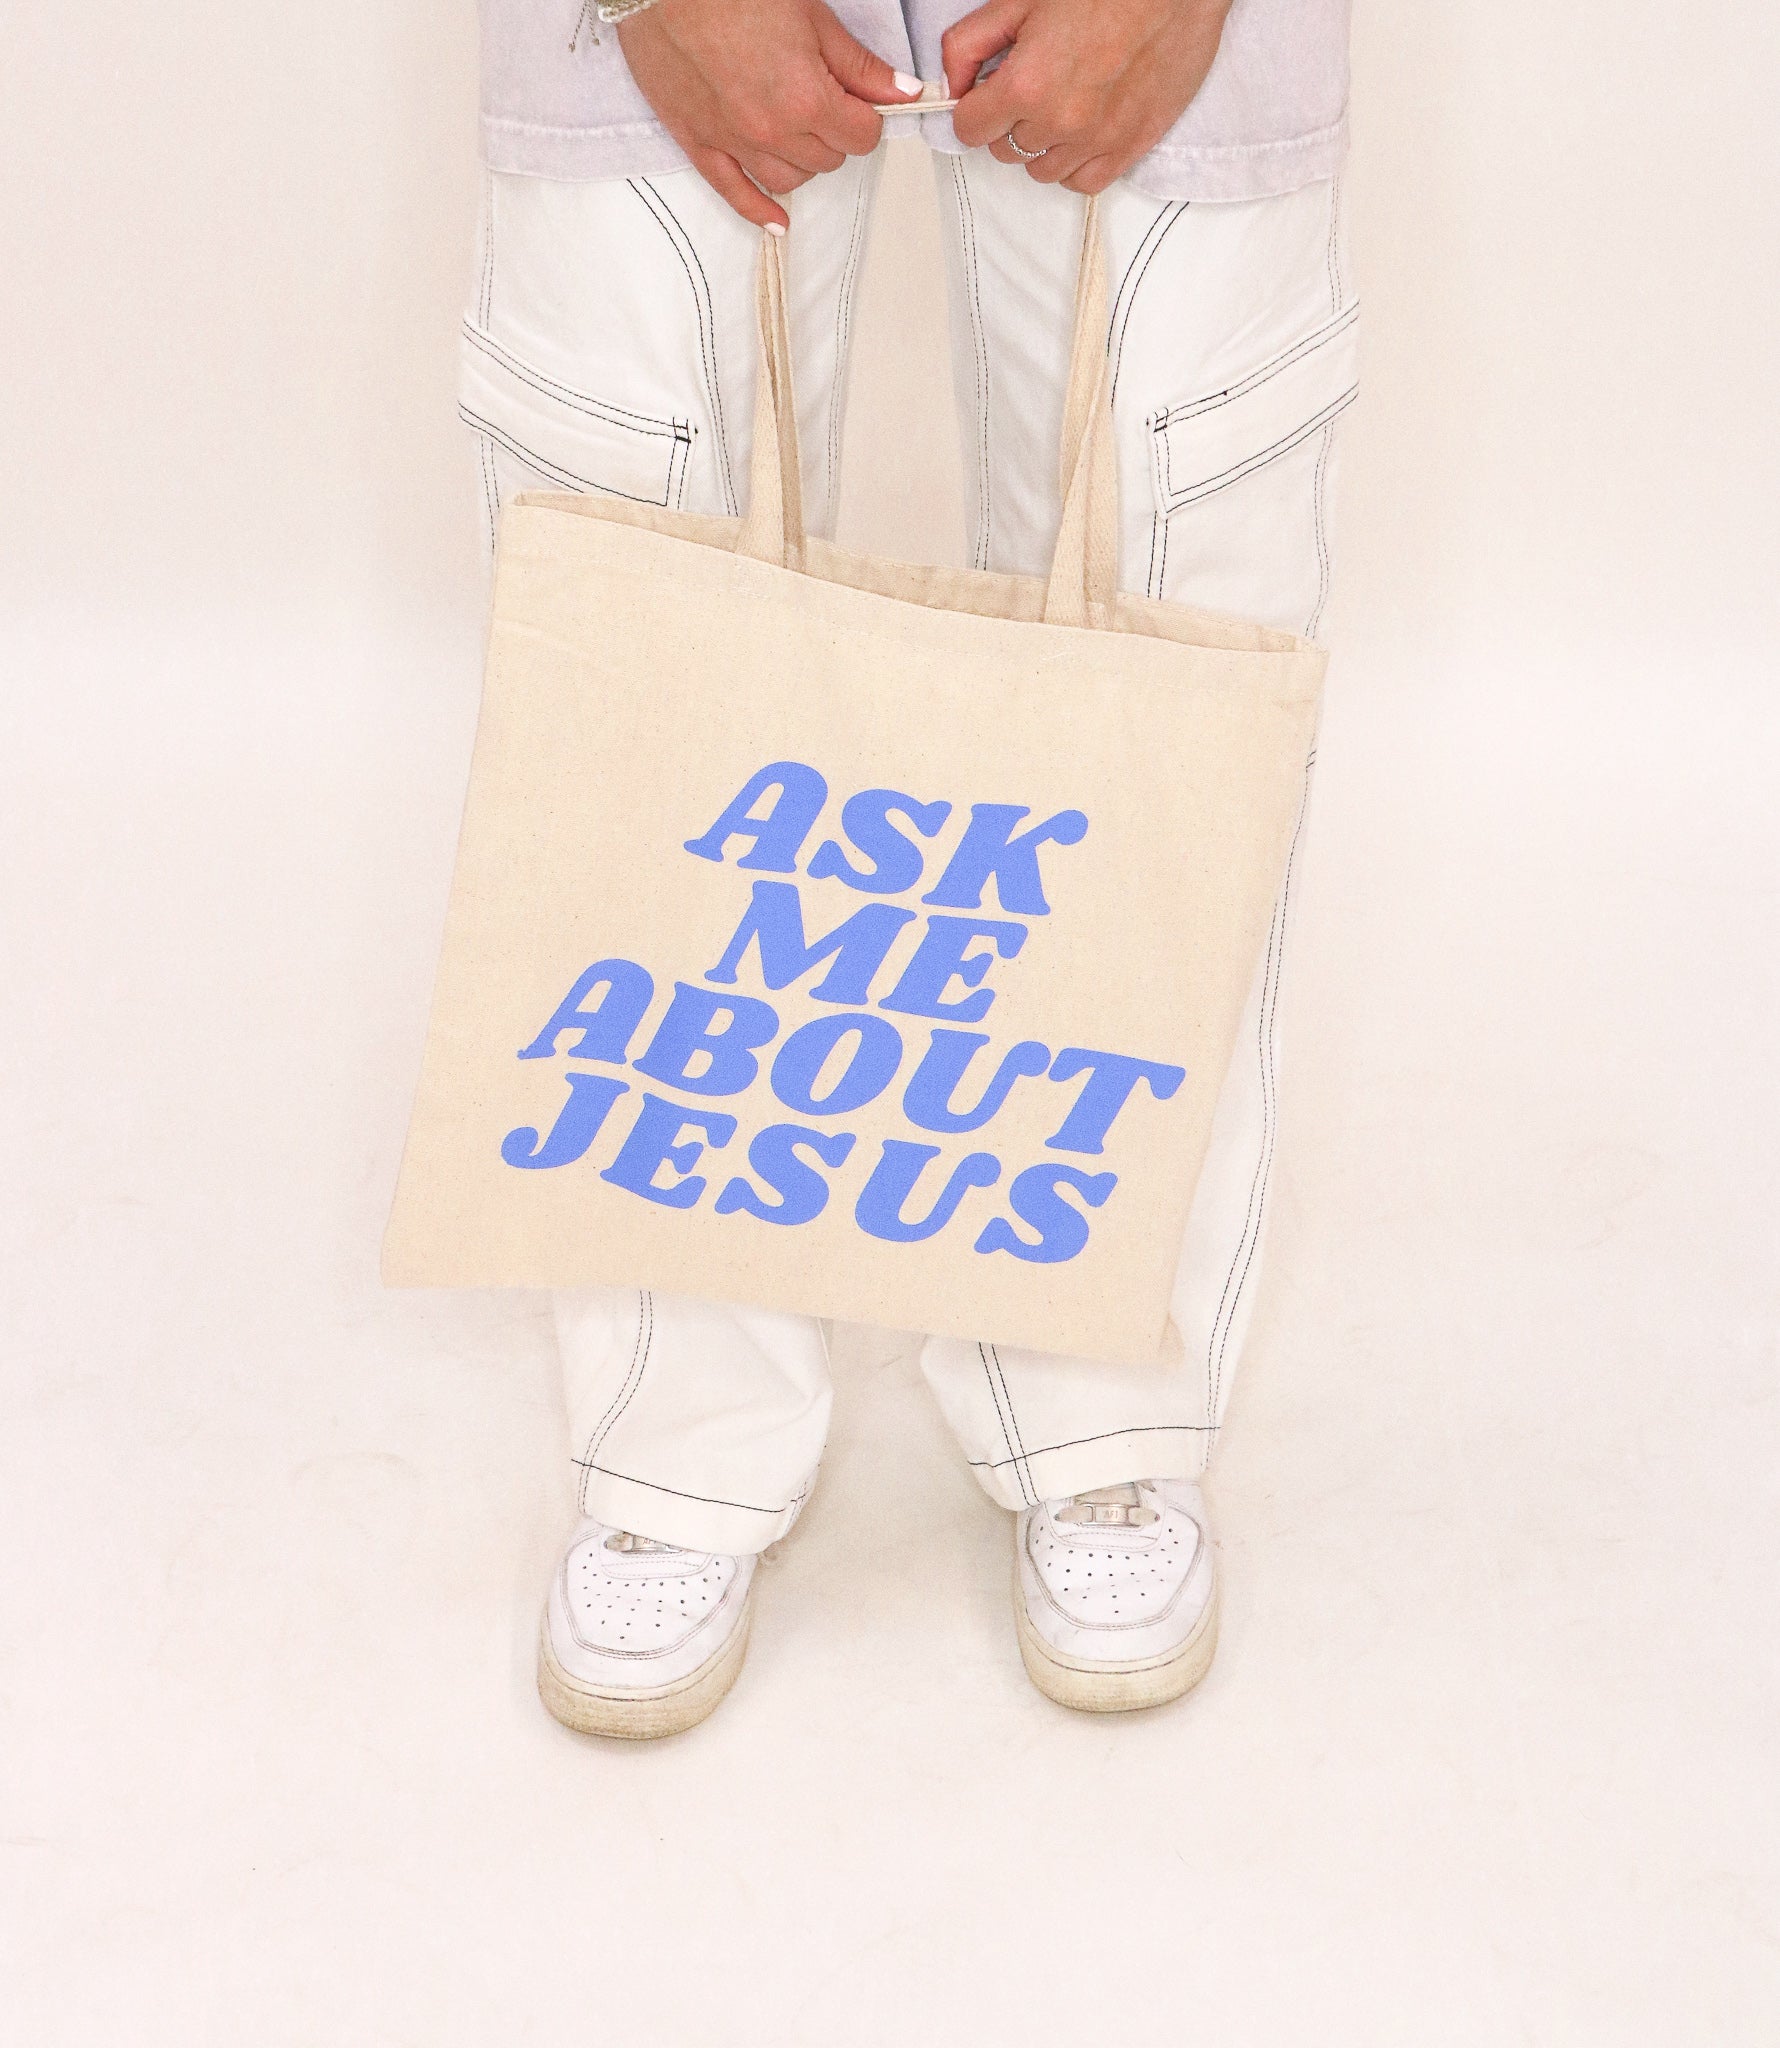 ASK ME ABOUT JESUS TOTE